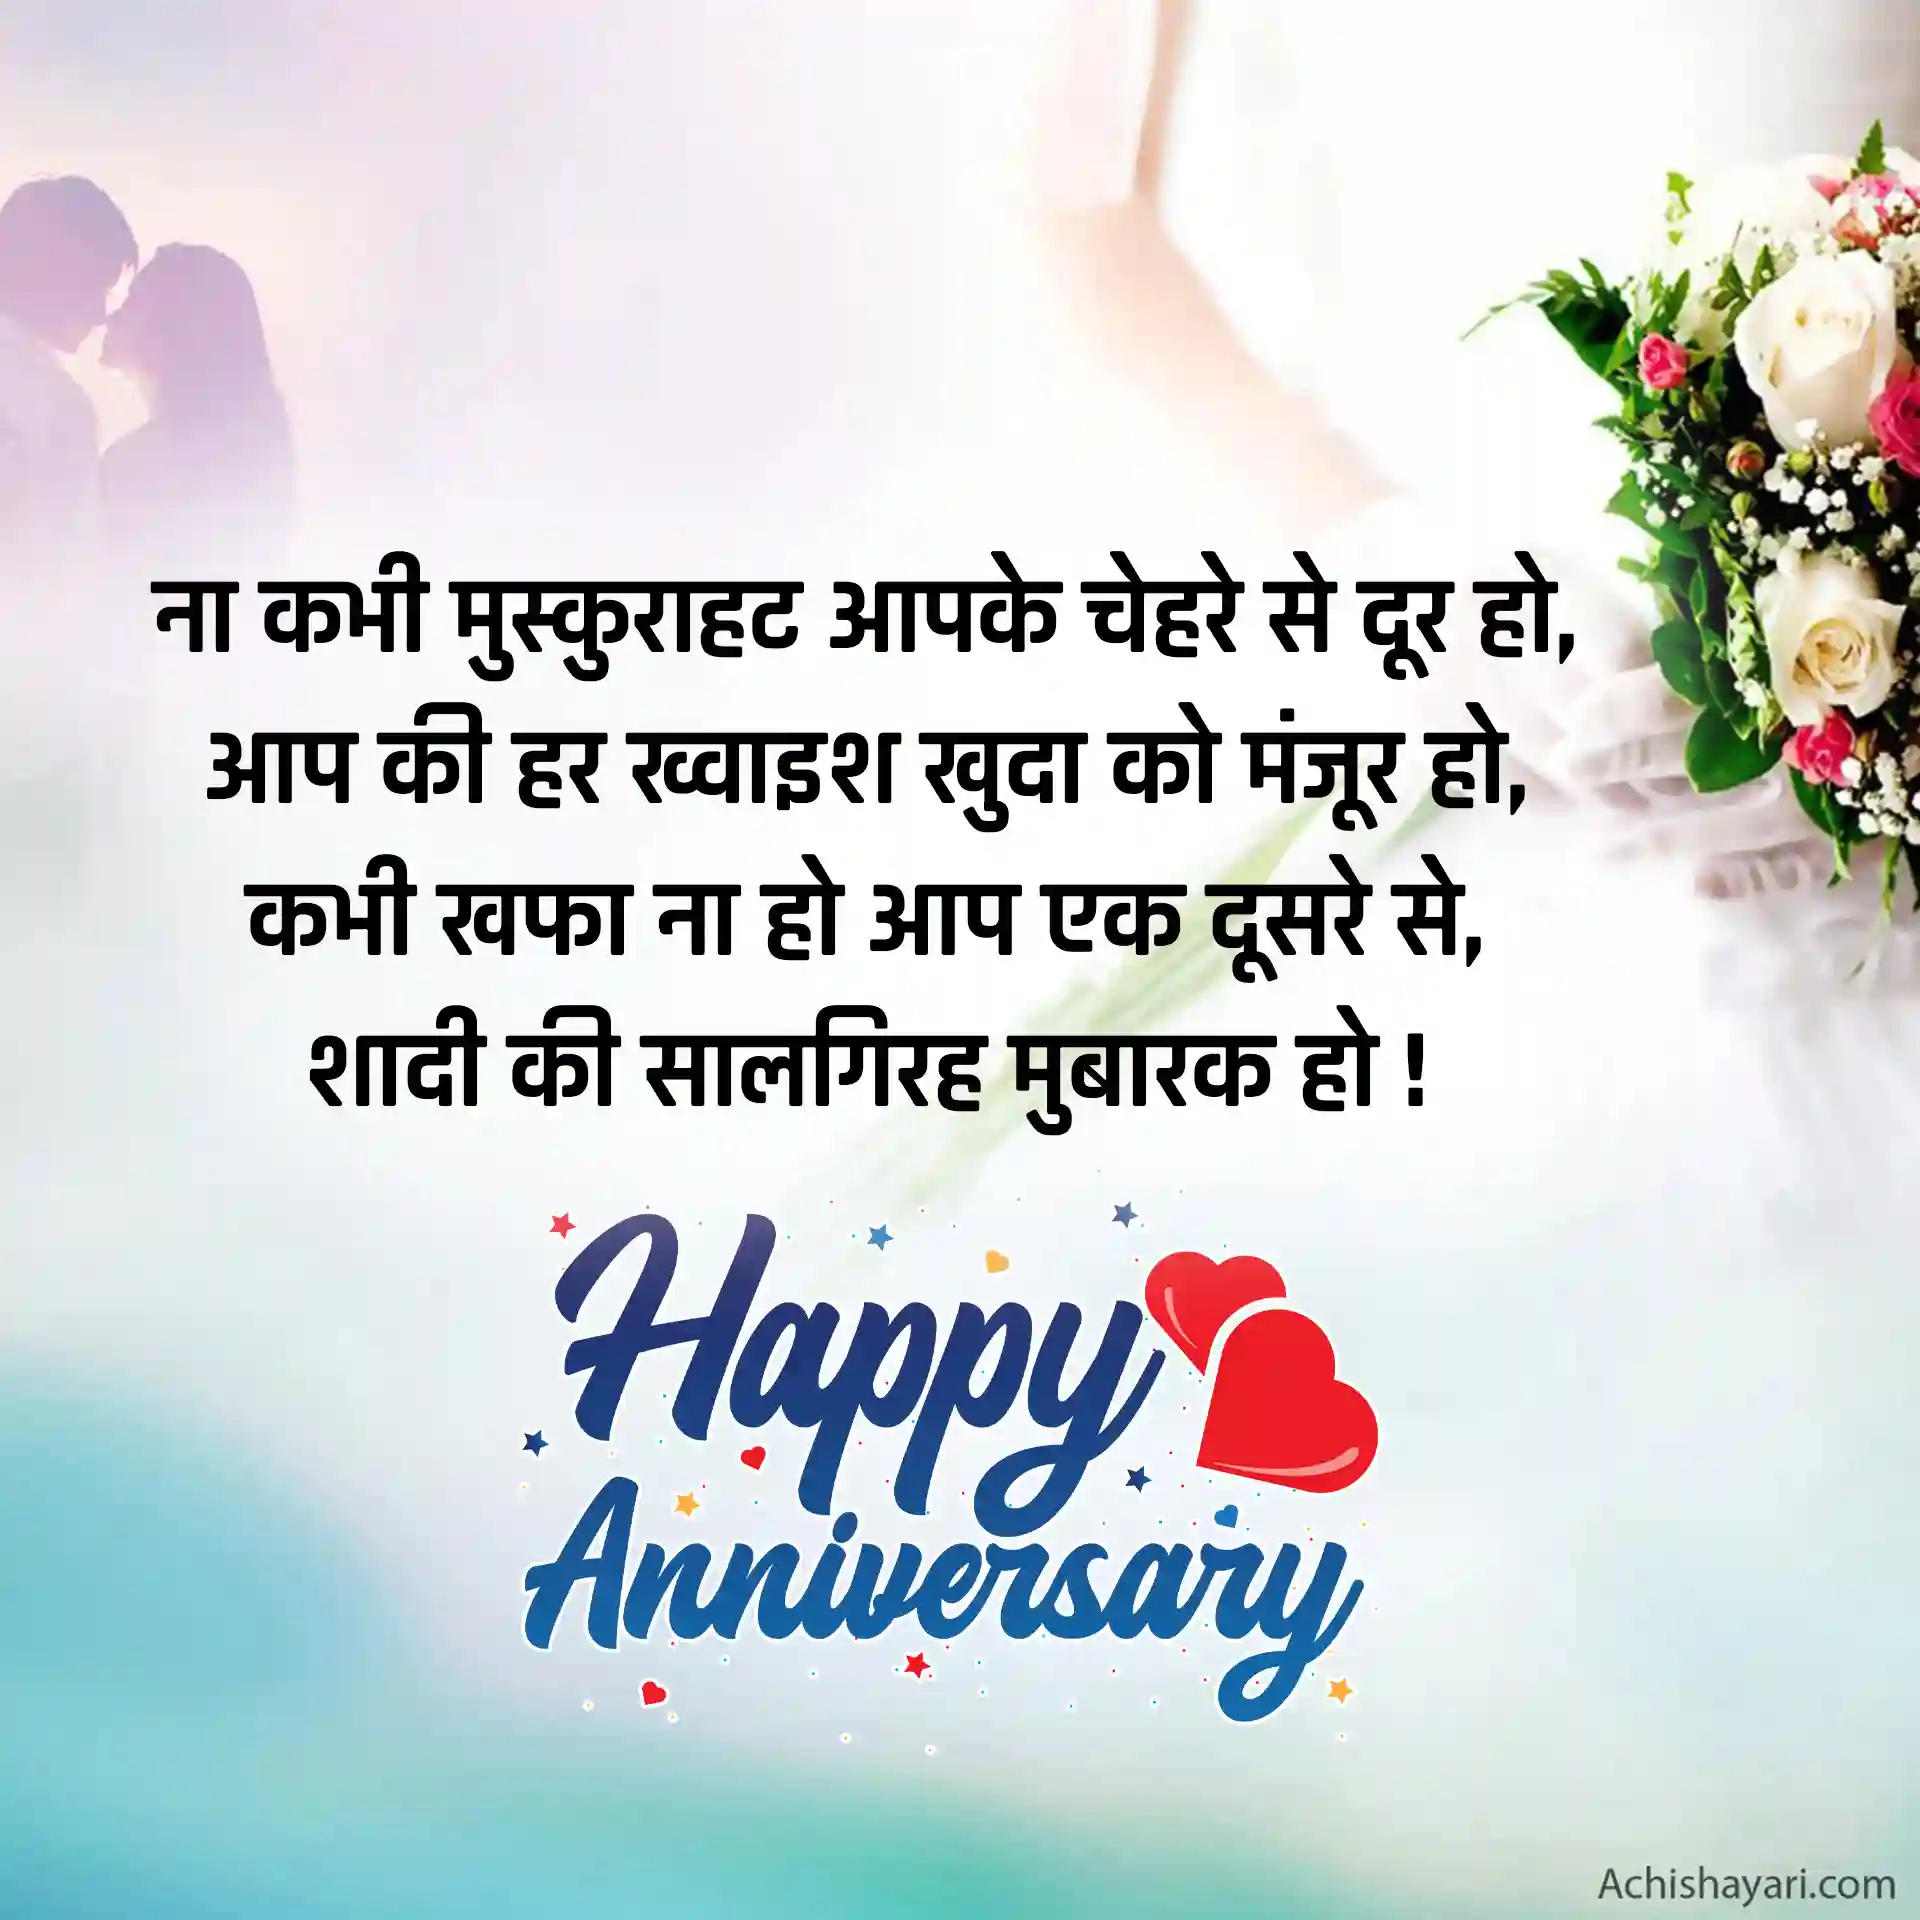 Happpy Marriage Anniversary Wishes in Hindi